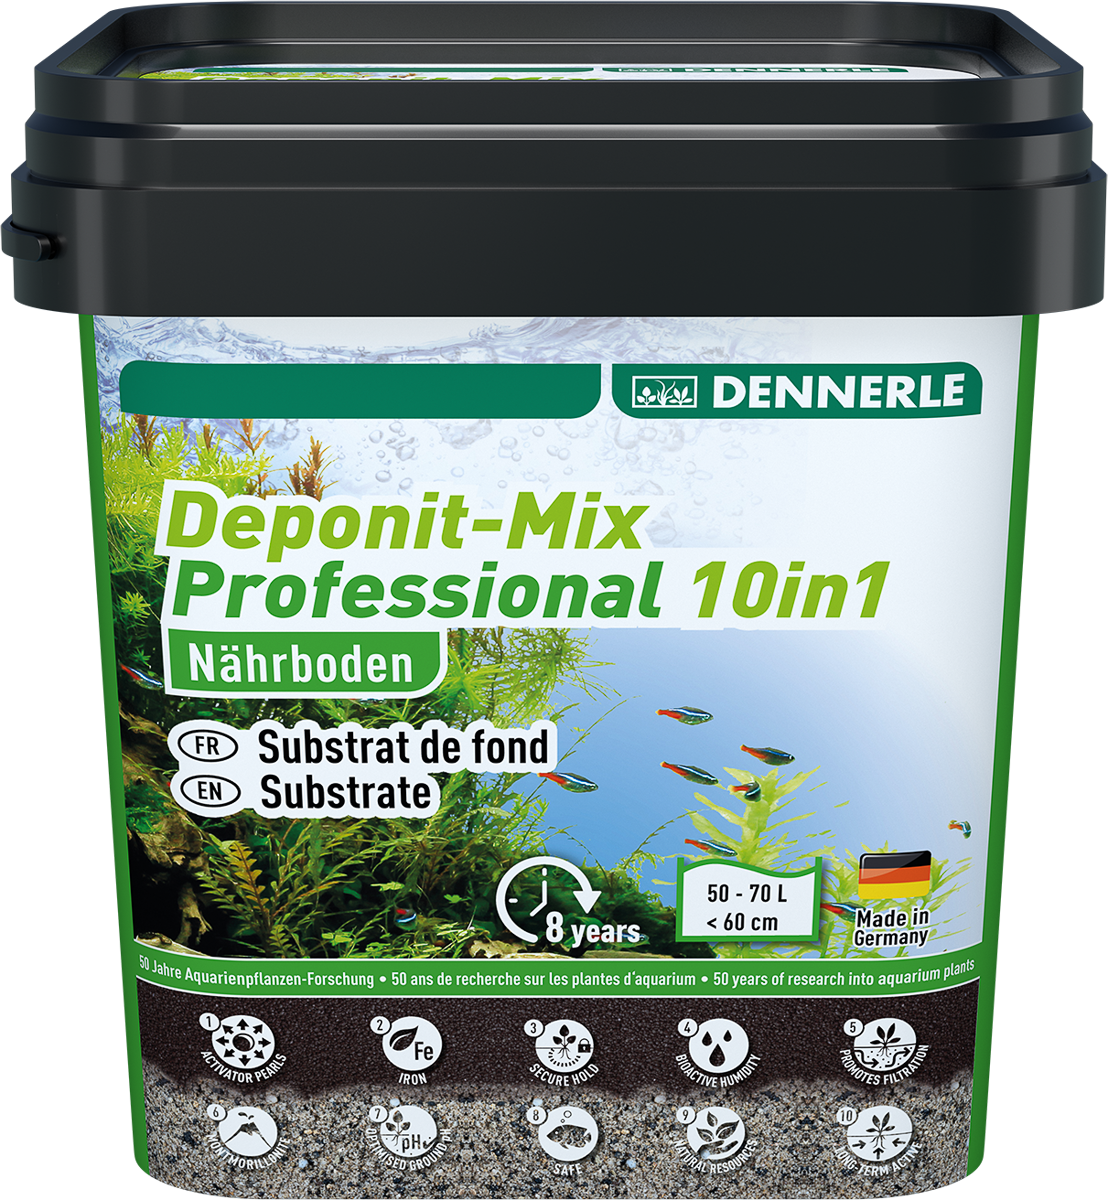 Dennerle Deponit-Mix Pro 10in1